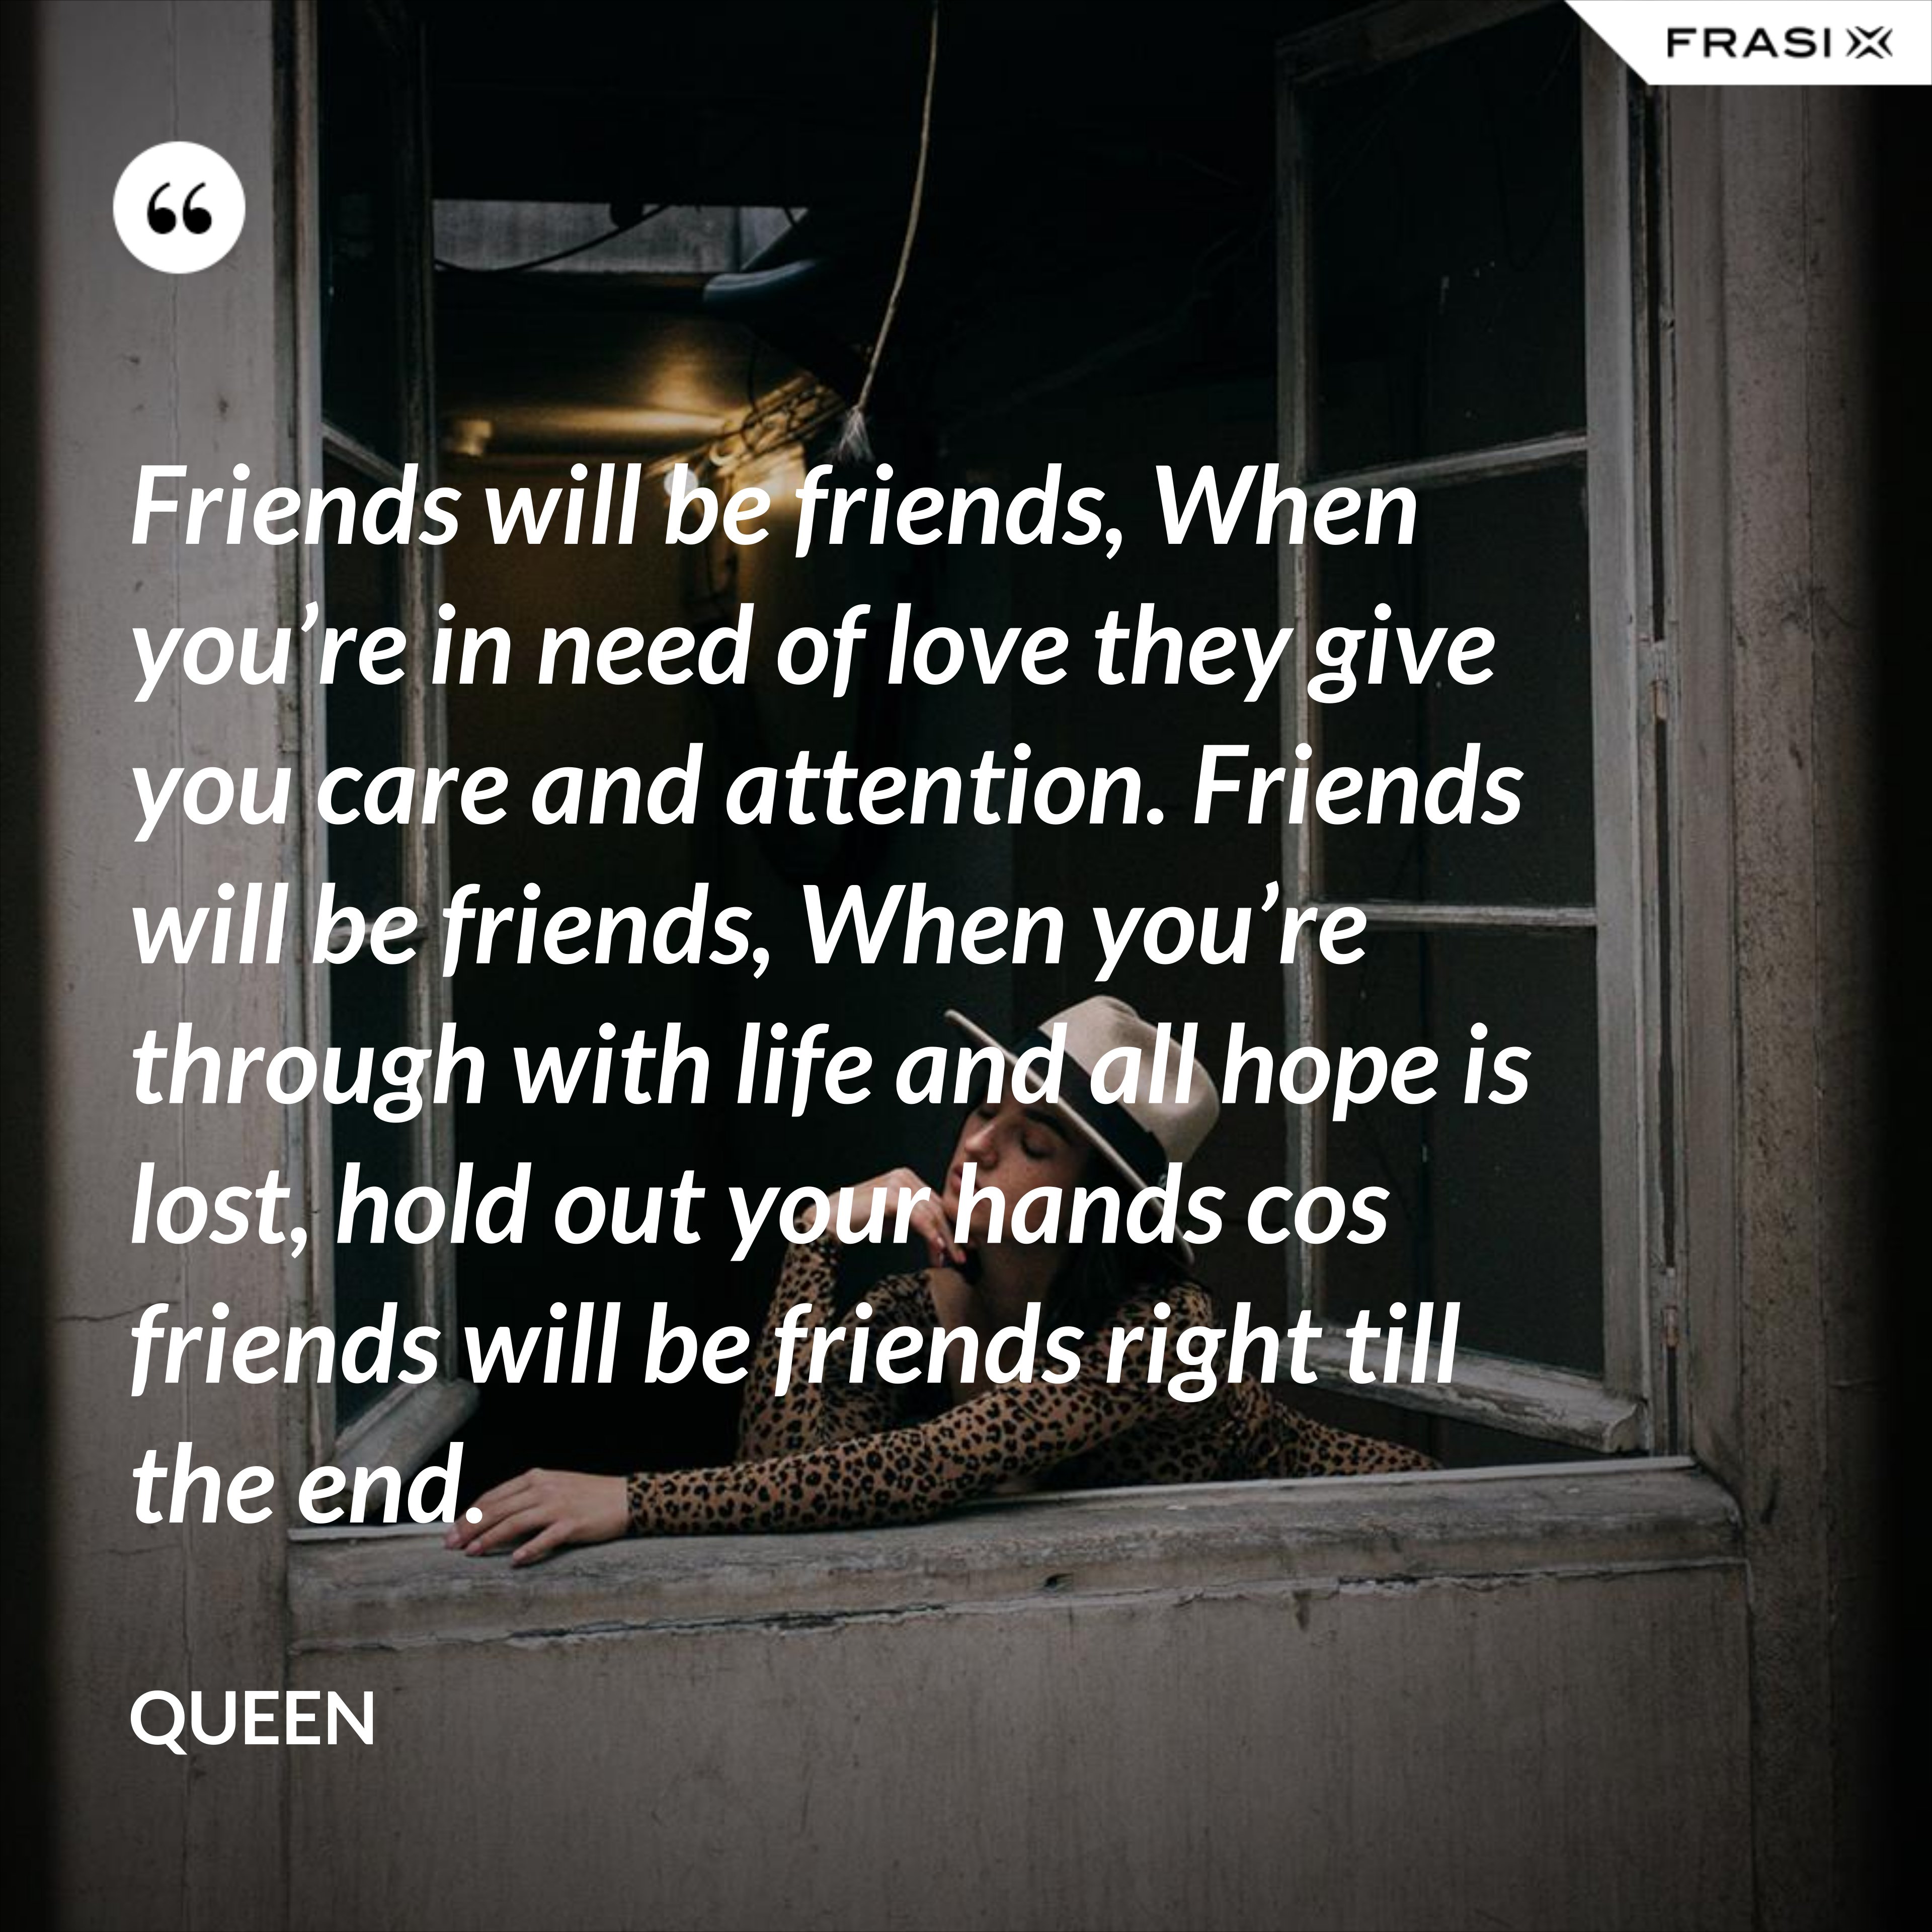 Friends will be friends, When you’re in need of love they give you care and attention. Friends will be friends, When you’re through with life and all hope is lost, hold out your hands cos friends will be friends right till the end. - Queen